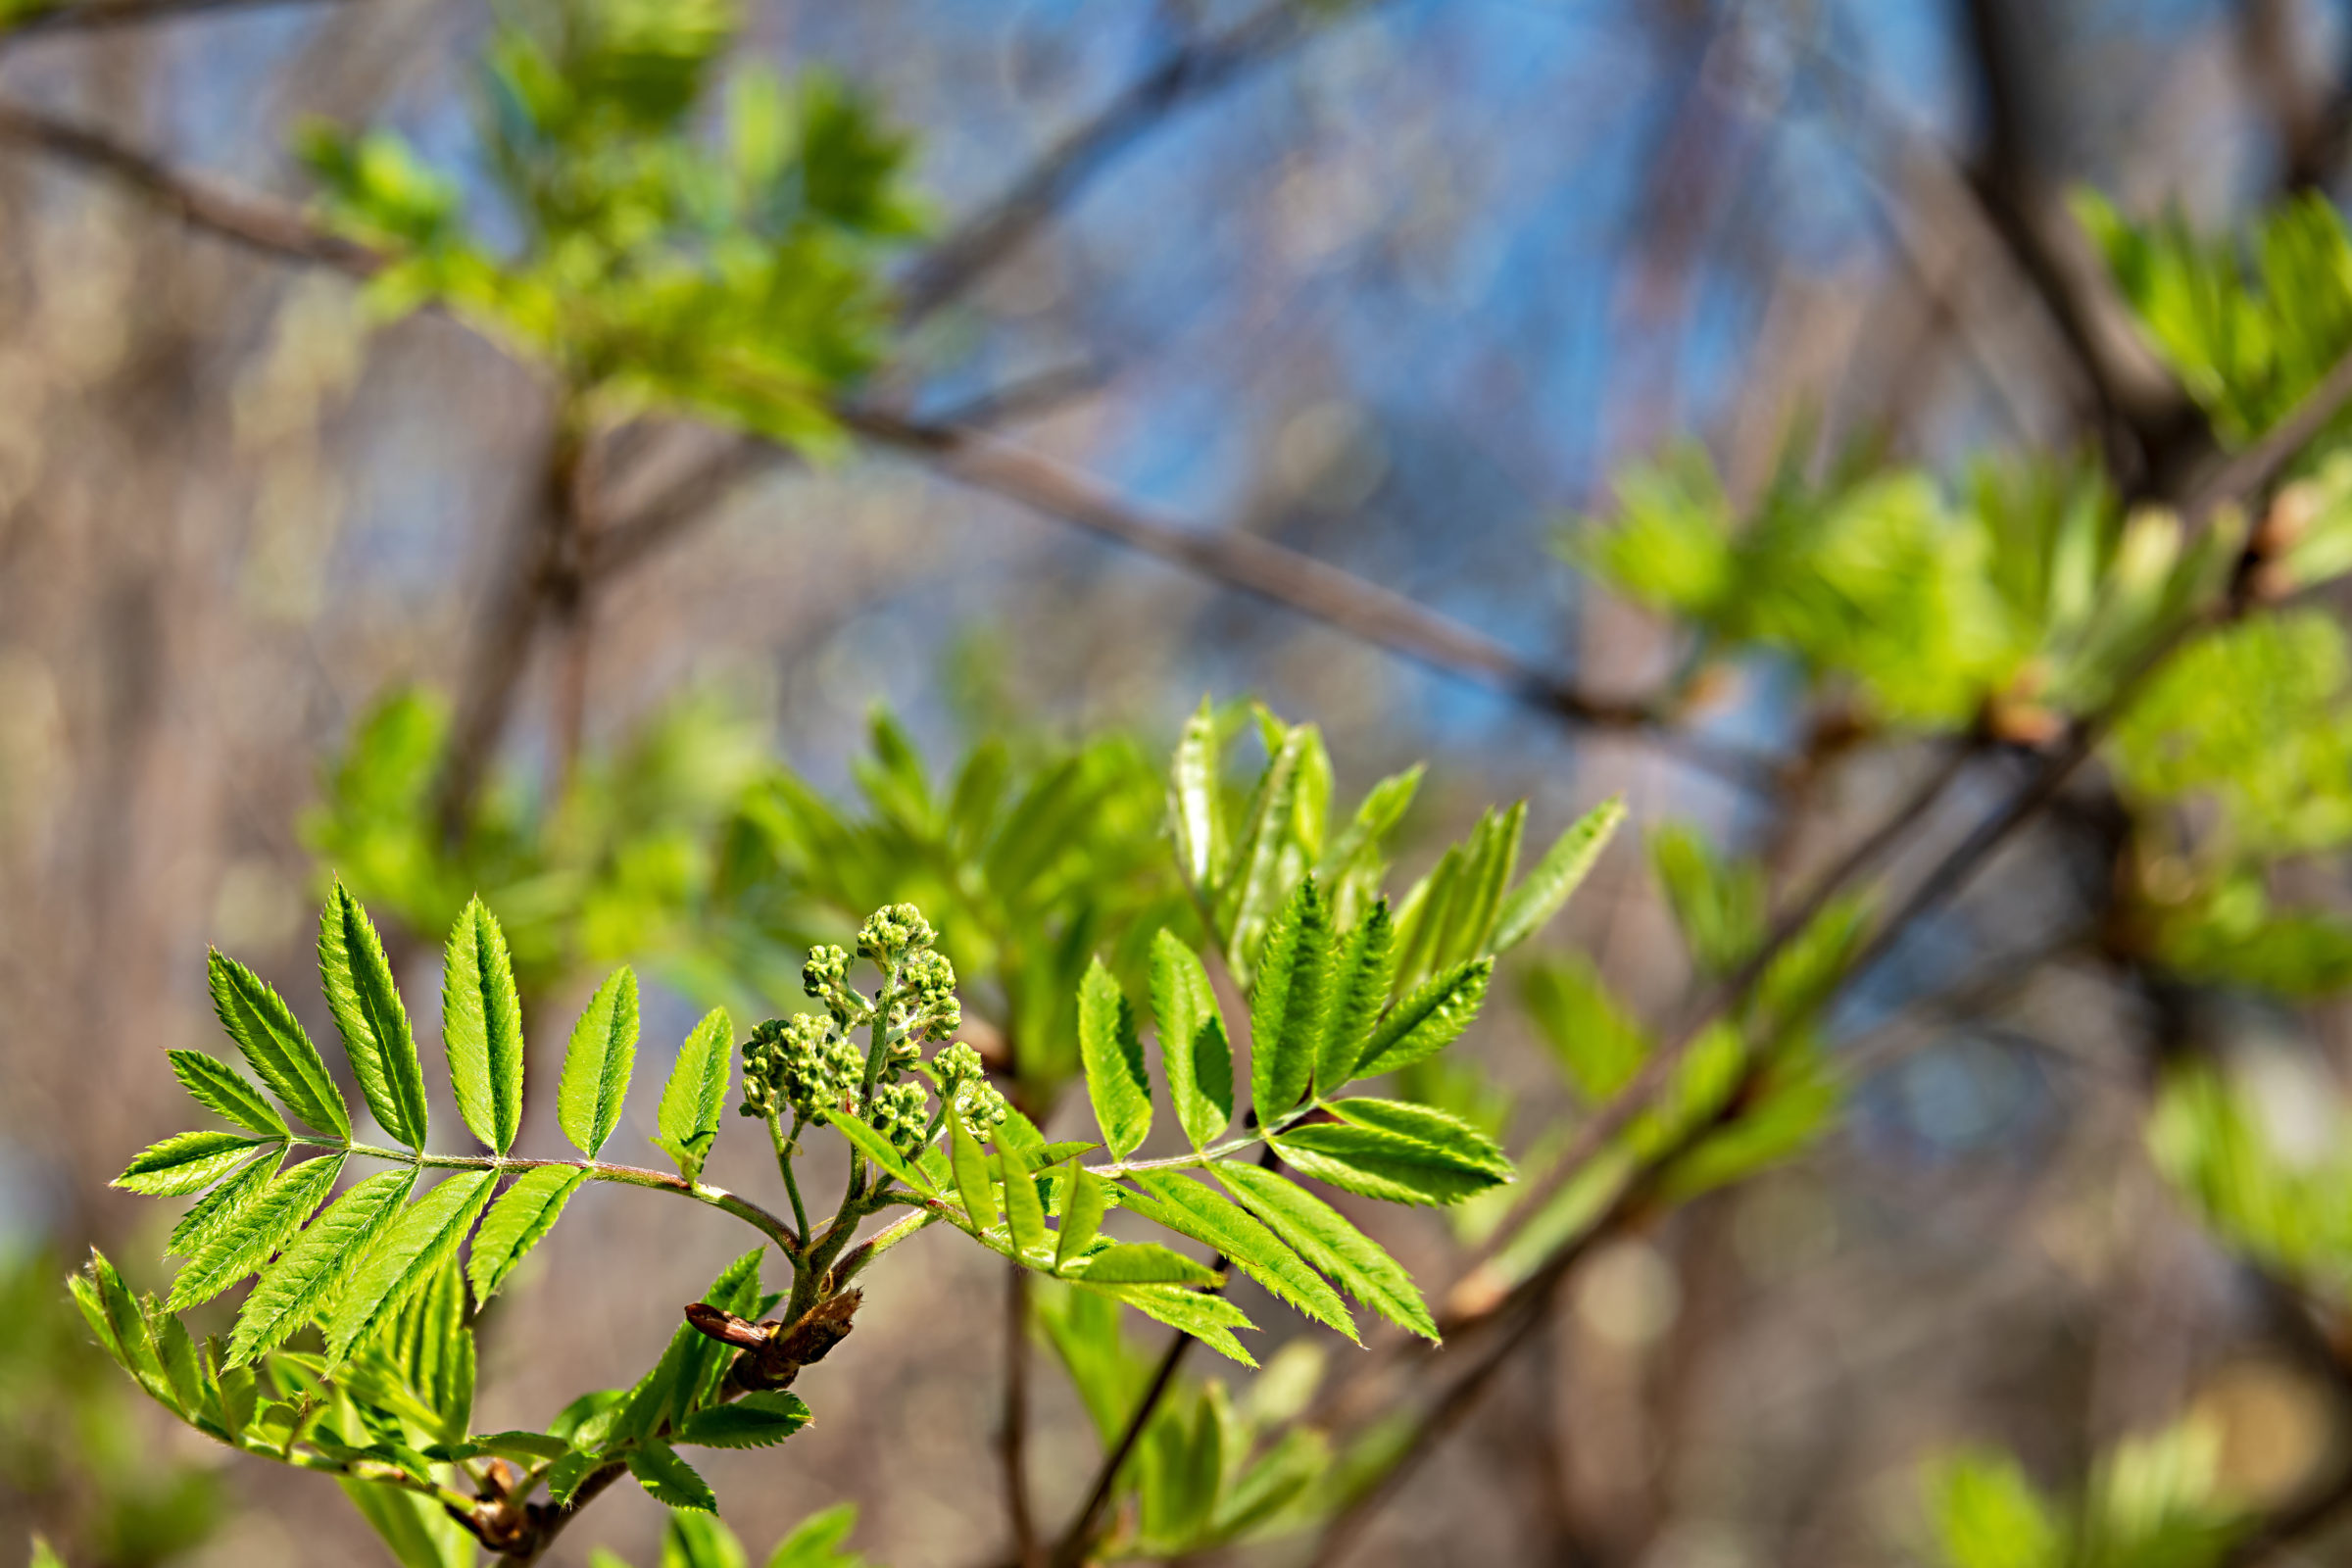 Fluffy, green, carved and fresh leaf of a mountain ash tree with swelling flower buds on a soft stem sprouts on a sunny spring day against a blue sky.